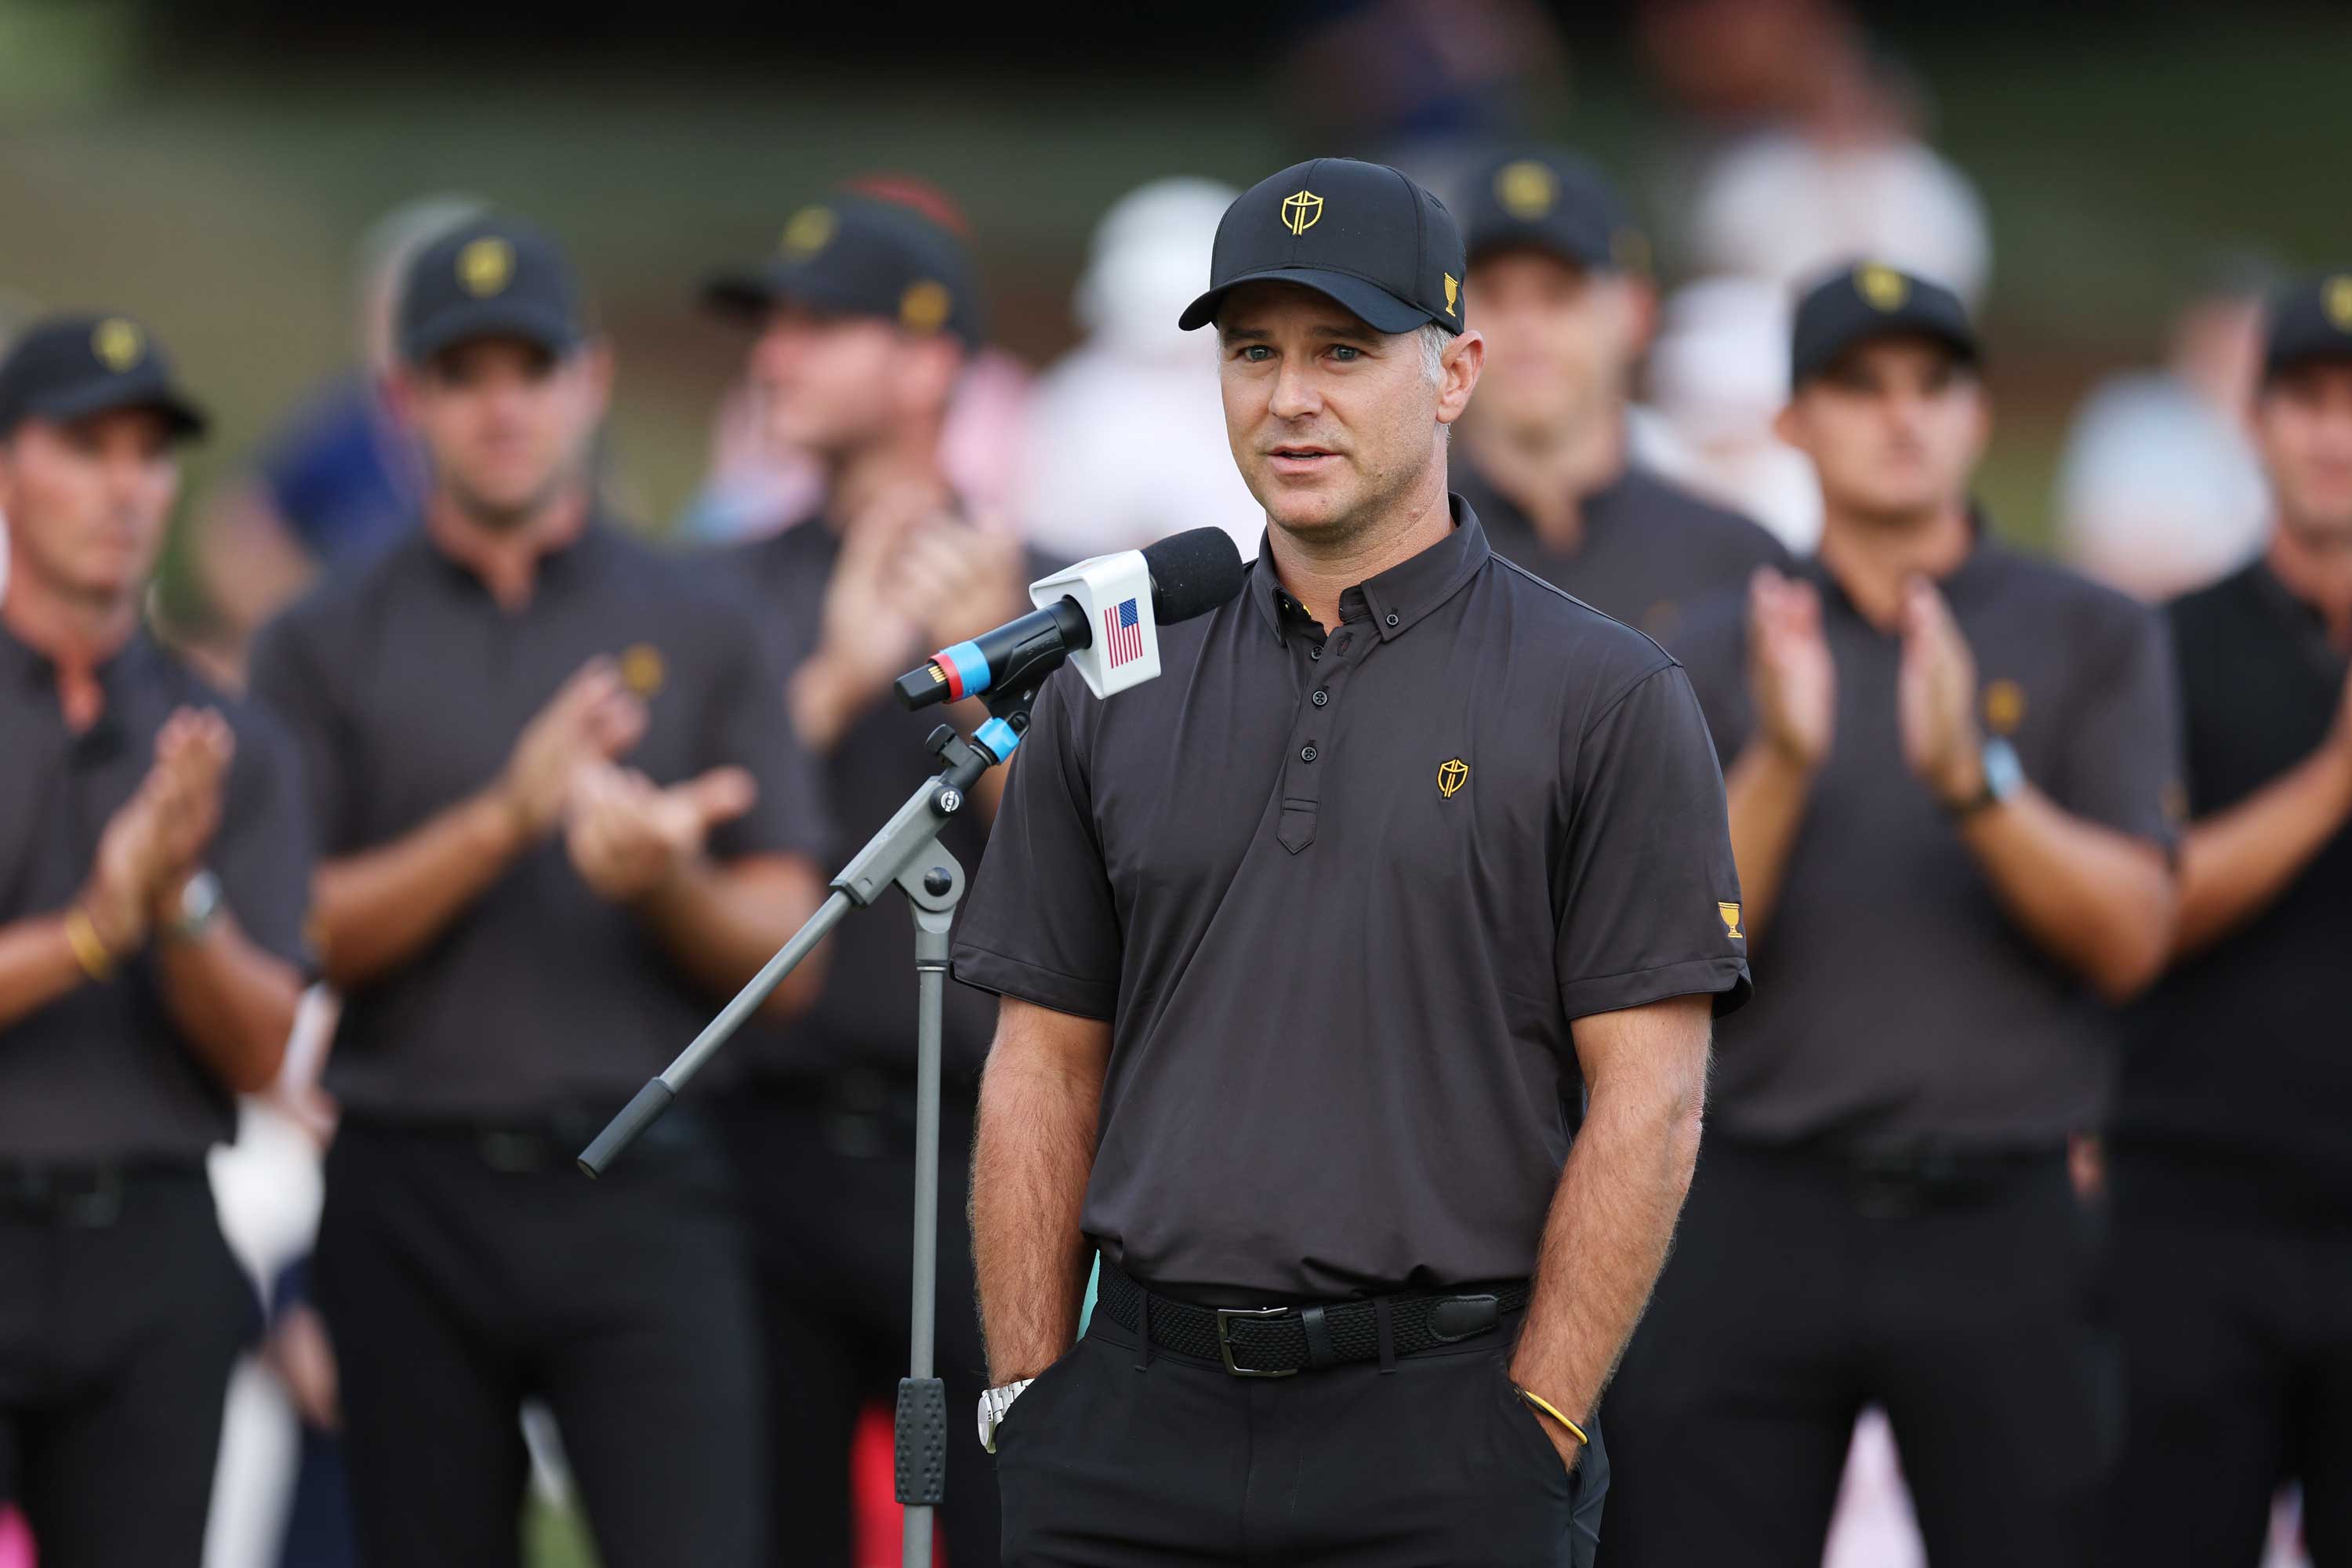 Presidents Cup 2022 Trevor Immelman has some spicy words for International team critics—Im sick and tired of this team being spoken of as a joke Golf News and Tour Information 